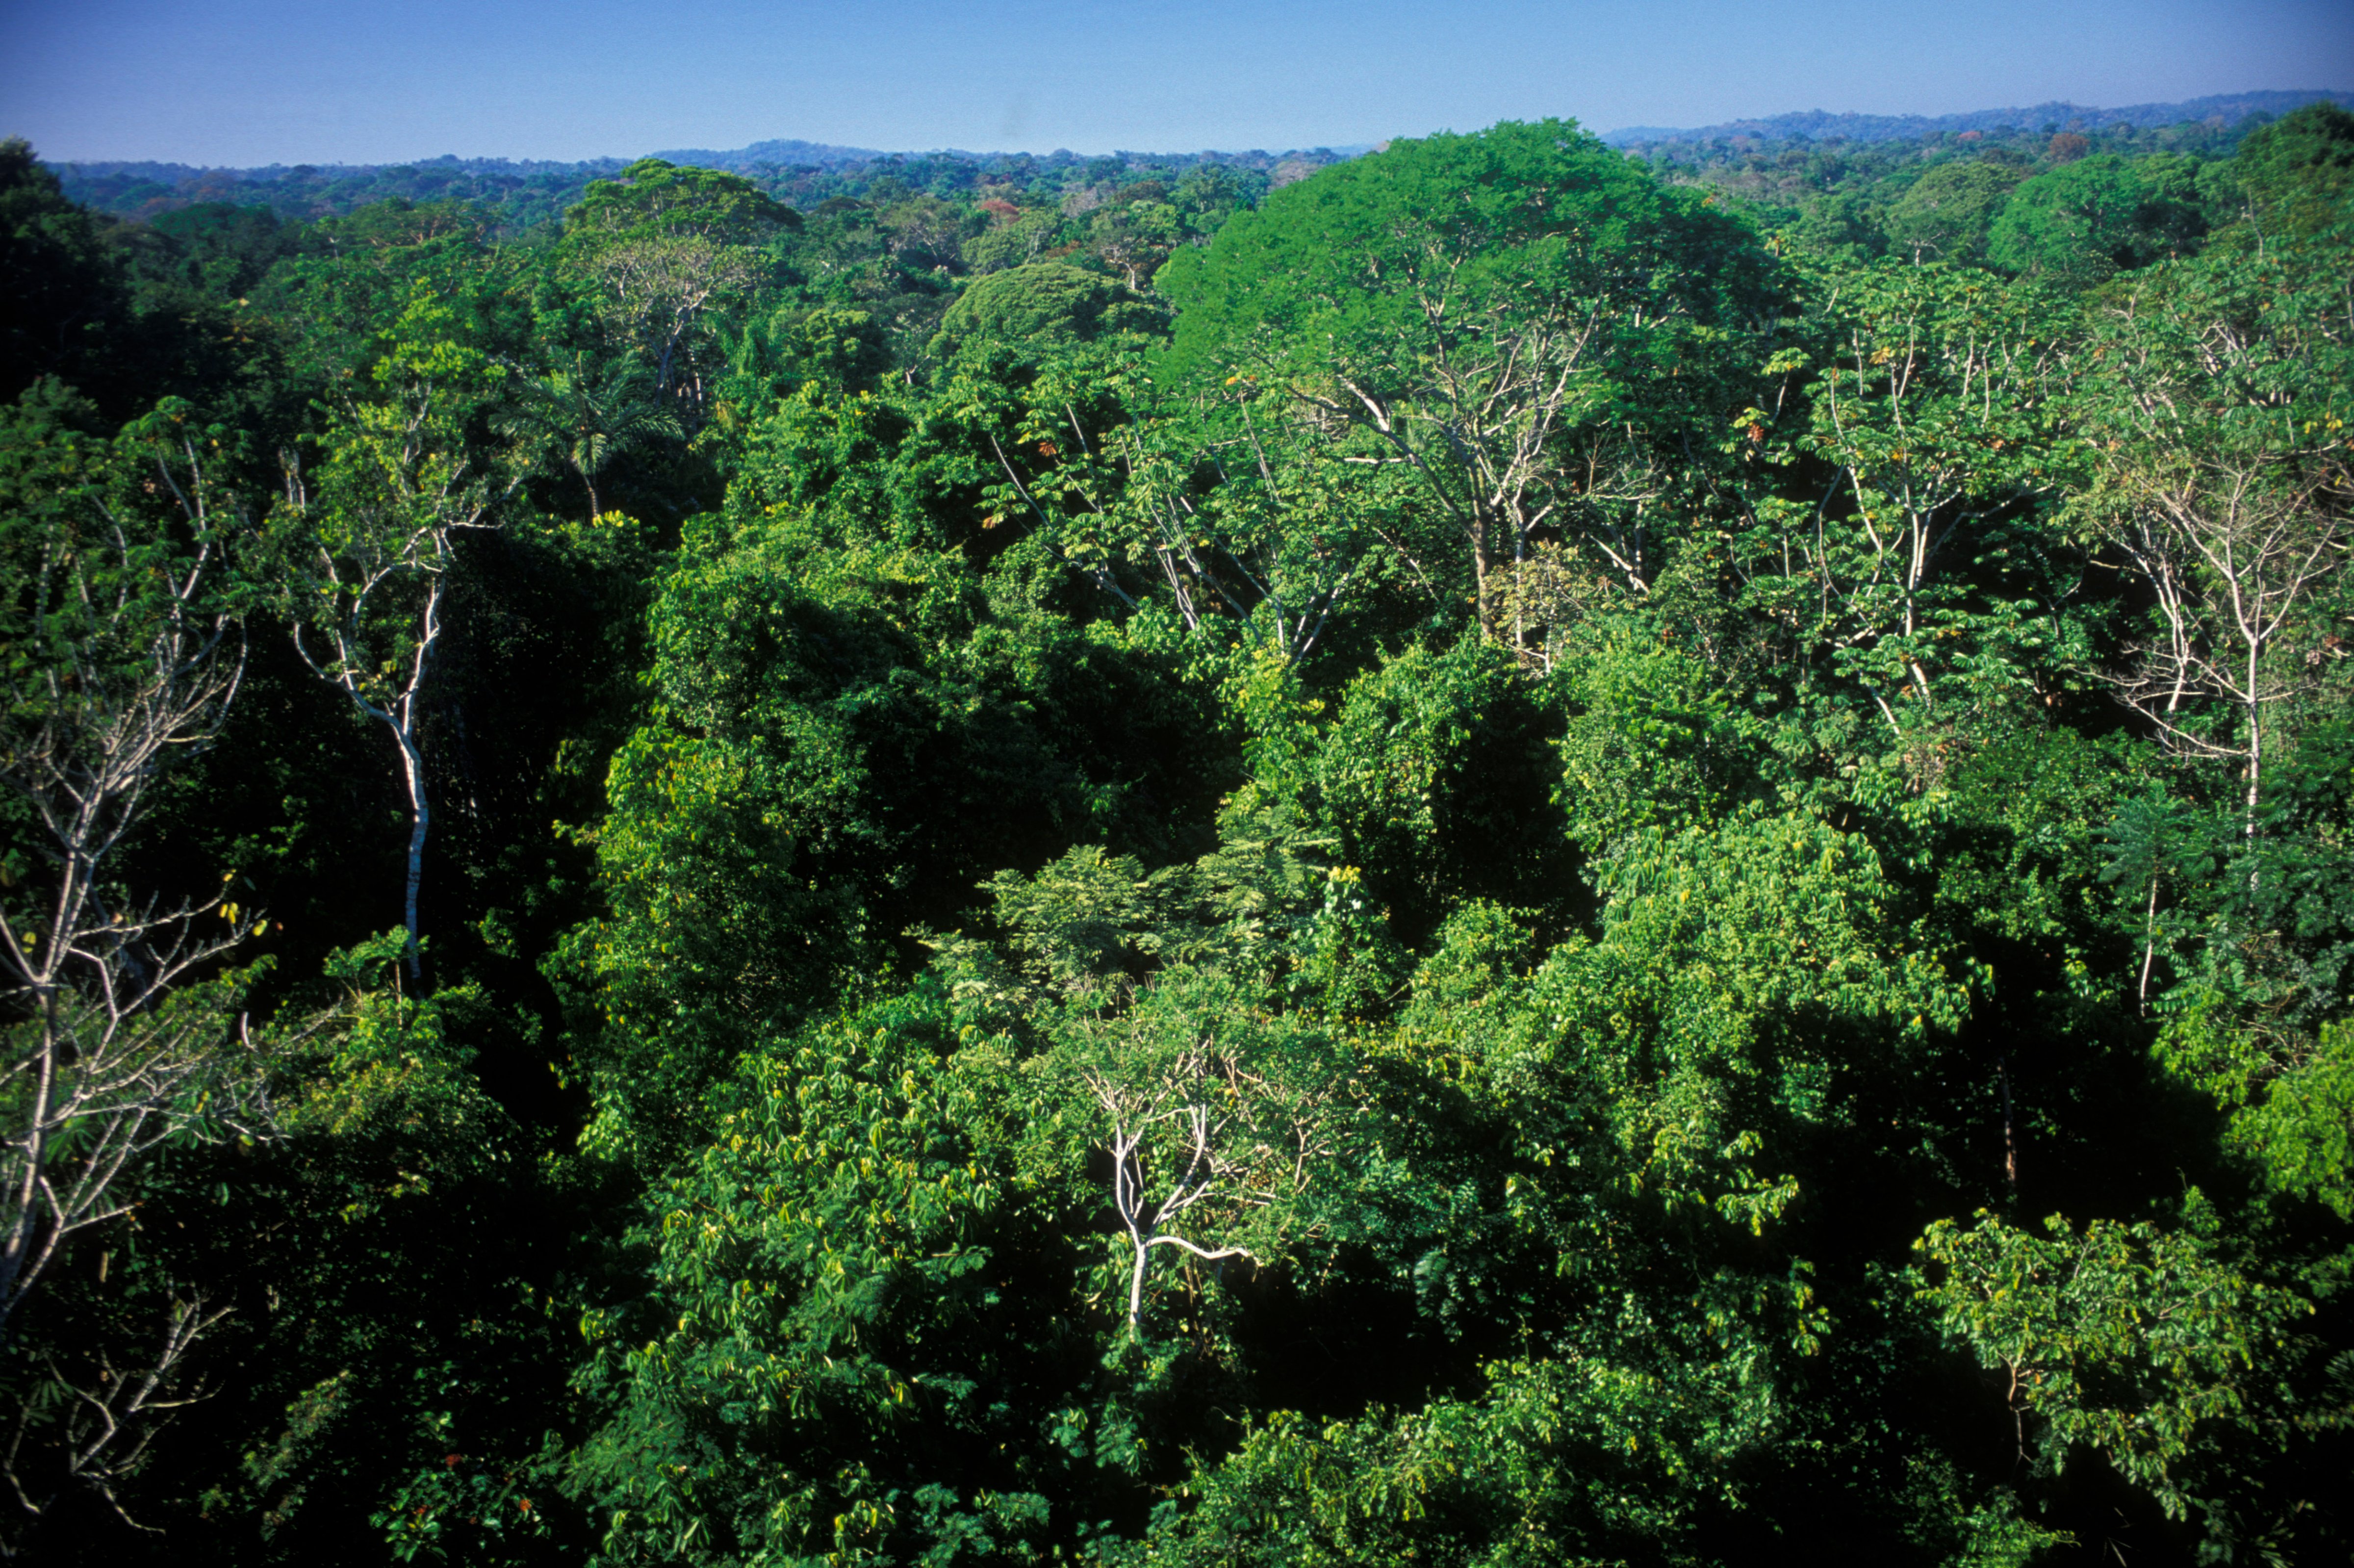 Easy to get lost—hard to be found: the dense canopy of the Amazon rainforest (Brazil Photos; LightRocket via Getty Images)